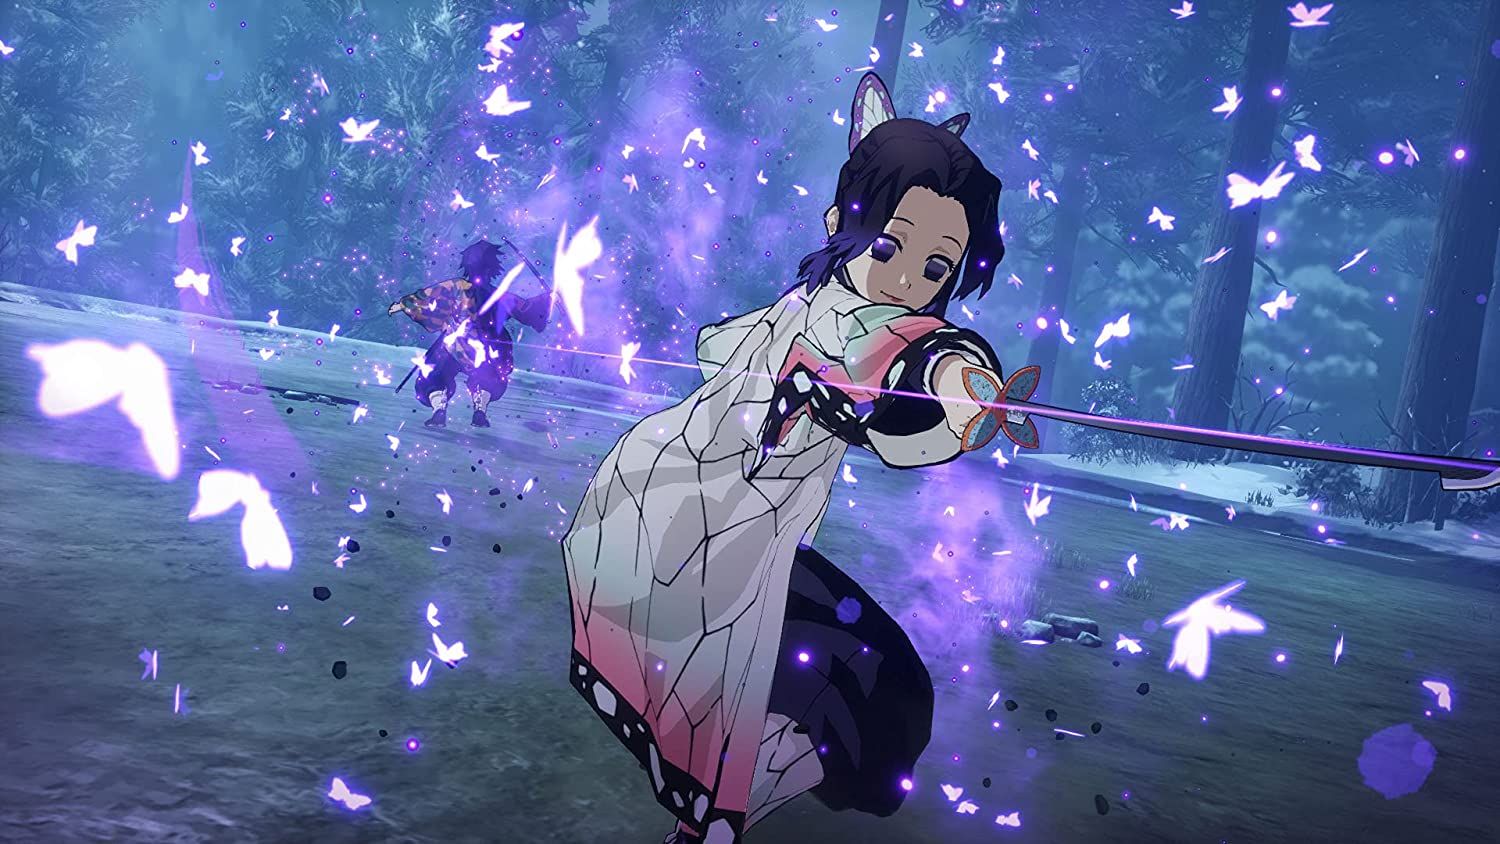 This Is the Best Deal on Demon Slayer: The Hinokami Chronicles for PS4  Available Right Now